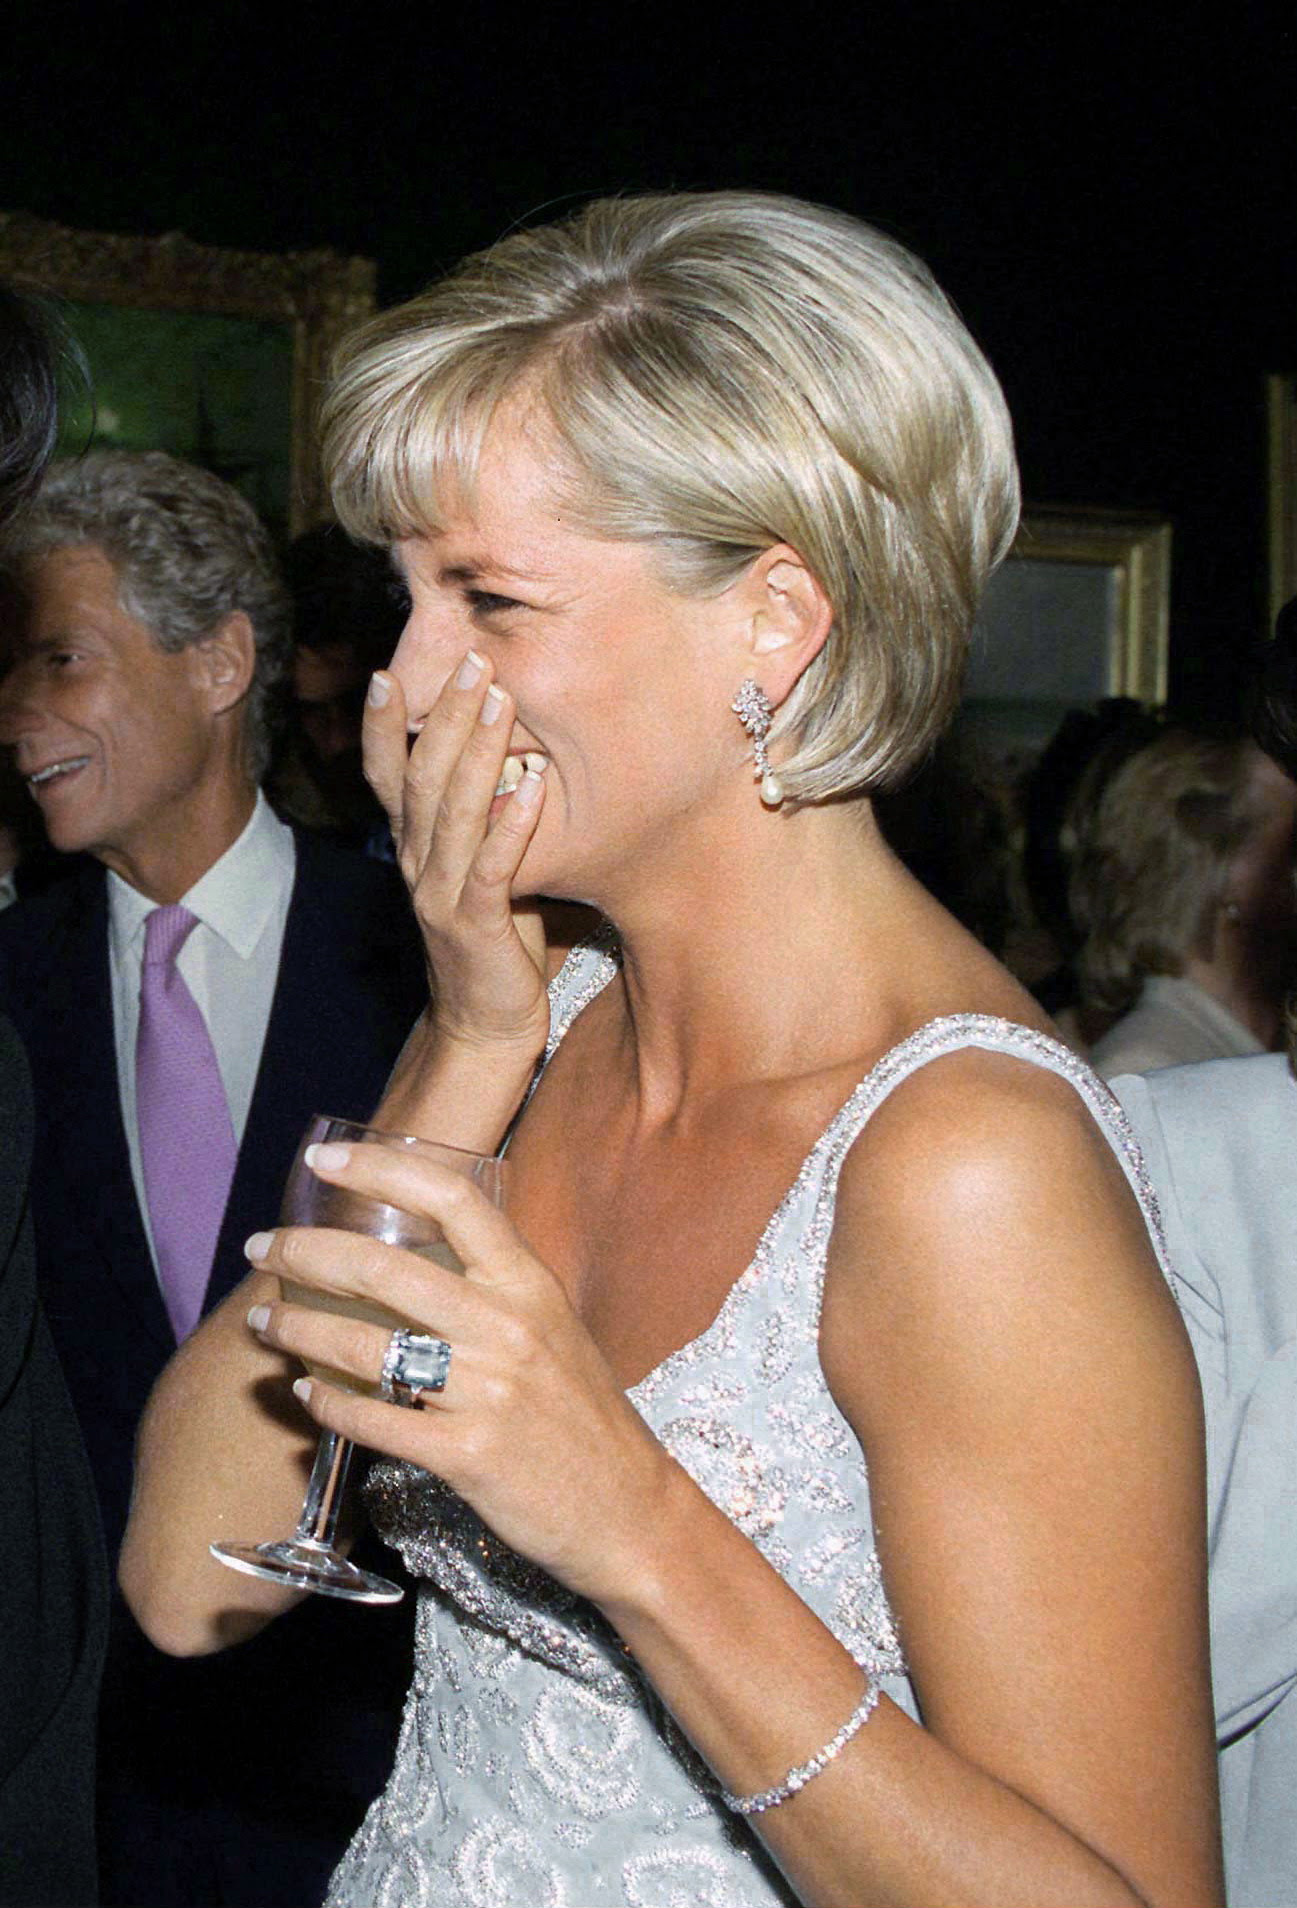 Princess Diana wore the ring in the 1990s, and it's thought to be worth £100,000 today